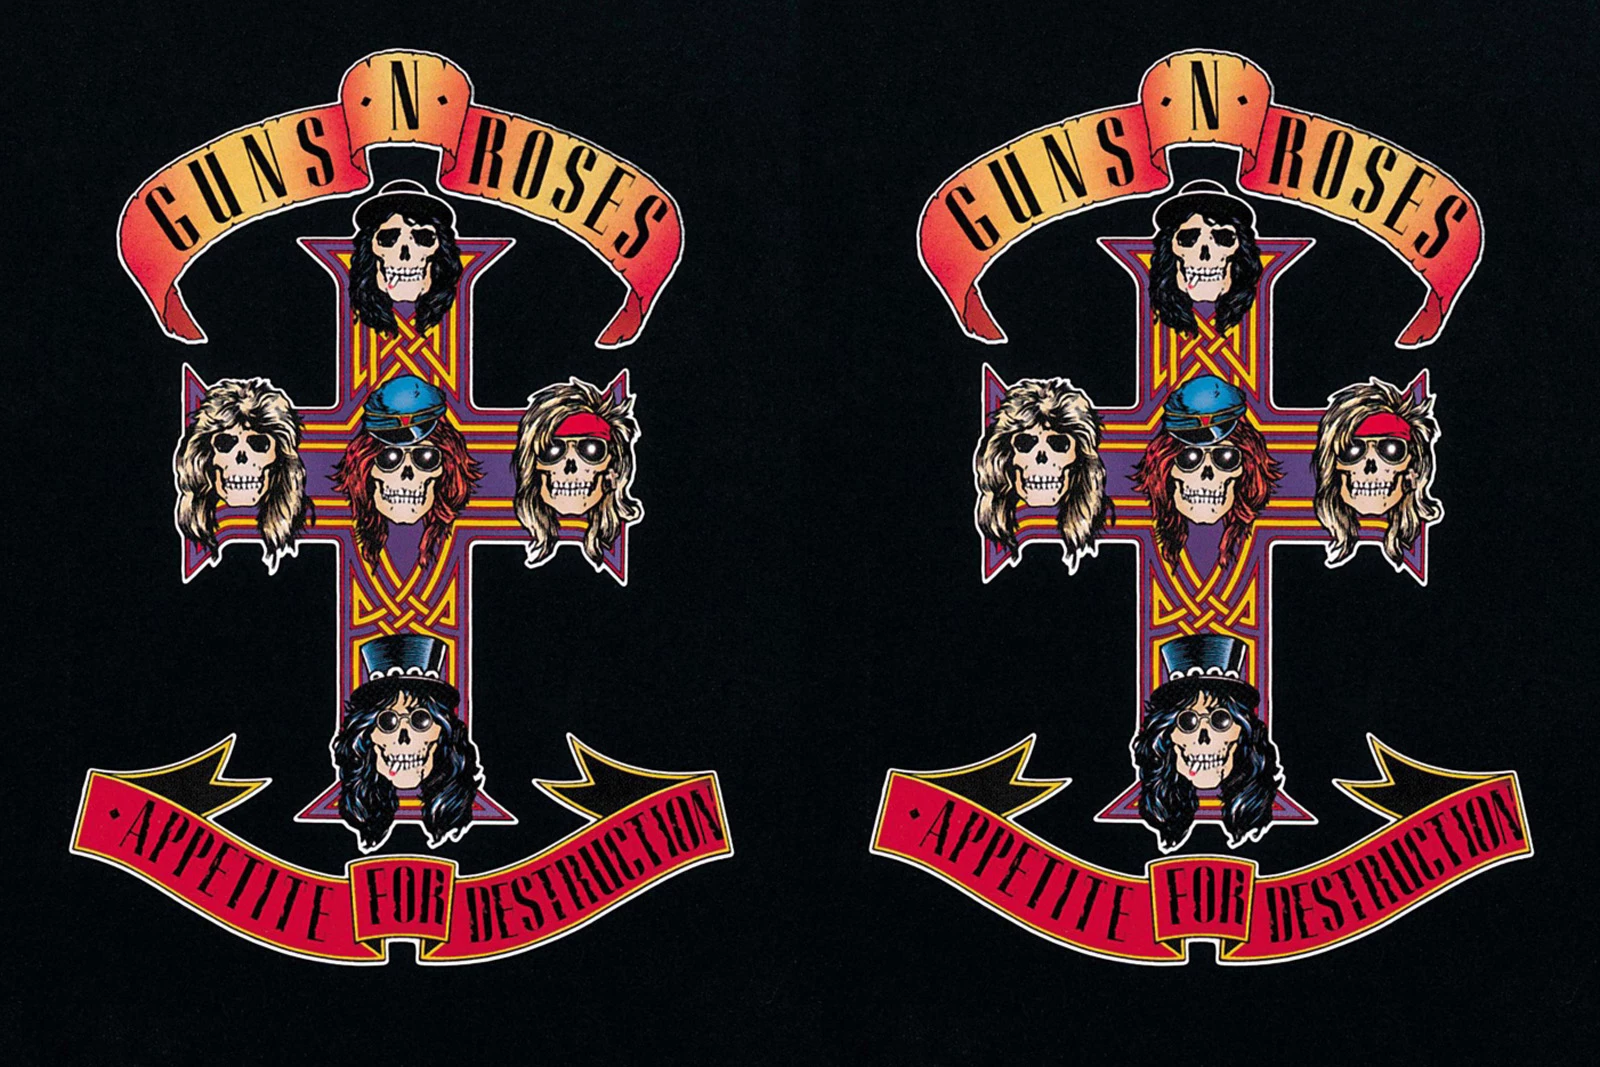 Double the 'Destruction': 13 Songs That Could Have Been on Guns N' Roses' Debut  Album